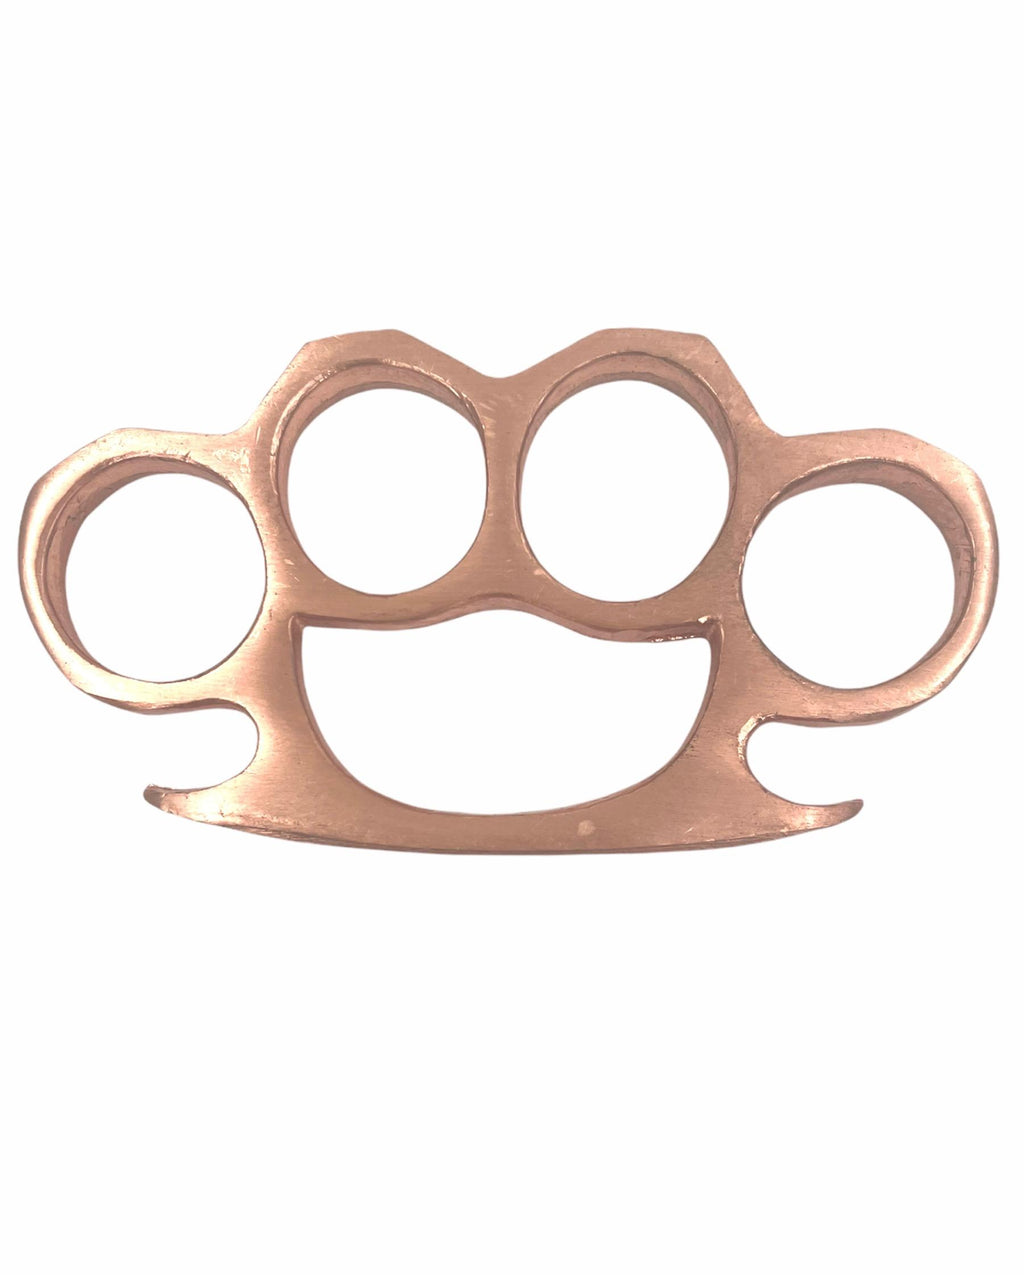 Solid Steel Knuckle Duster Brass Knuckle - COPPER